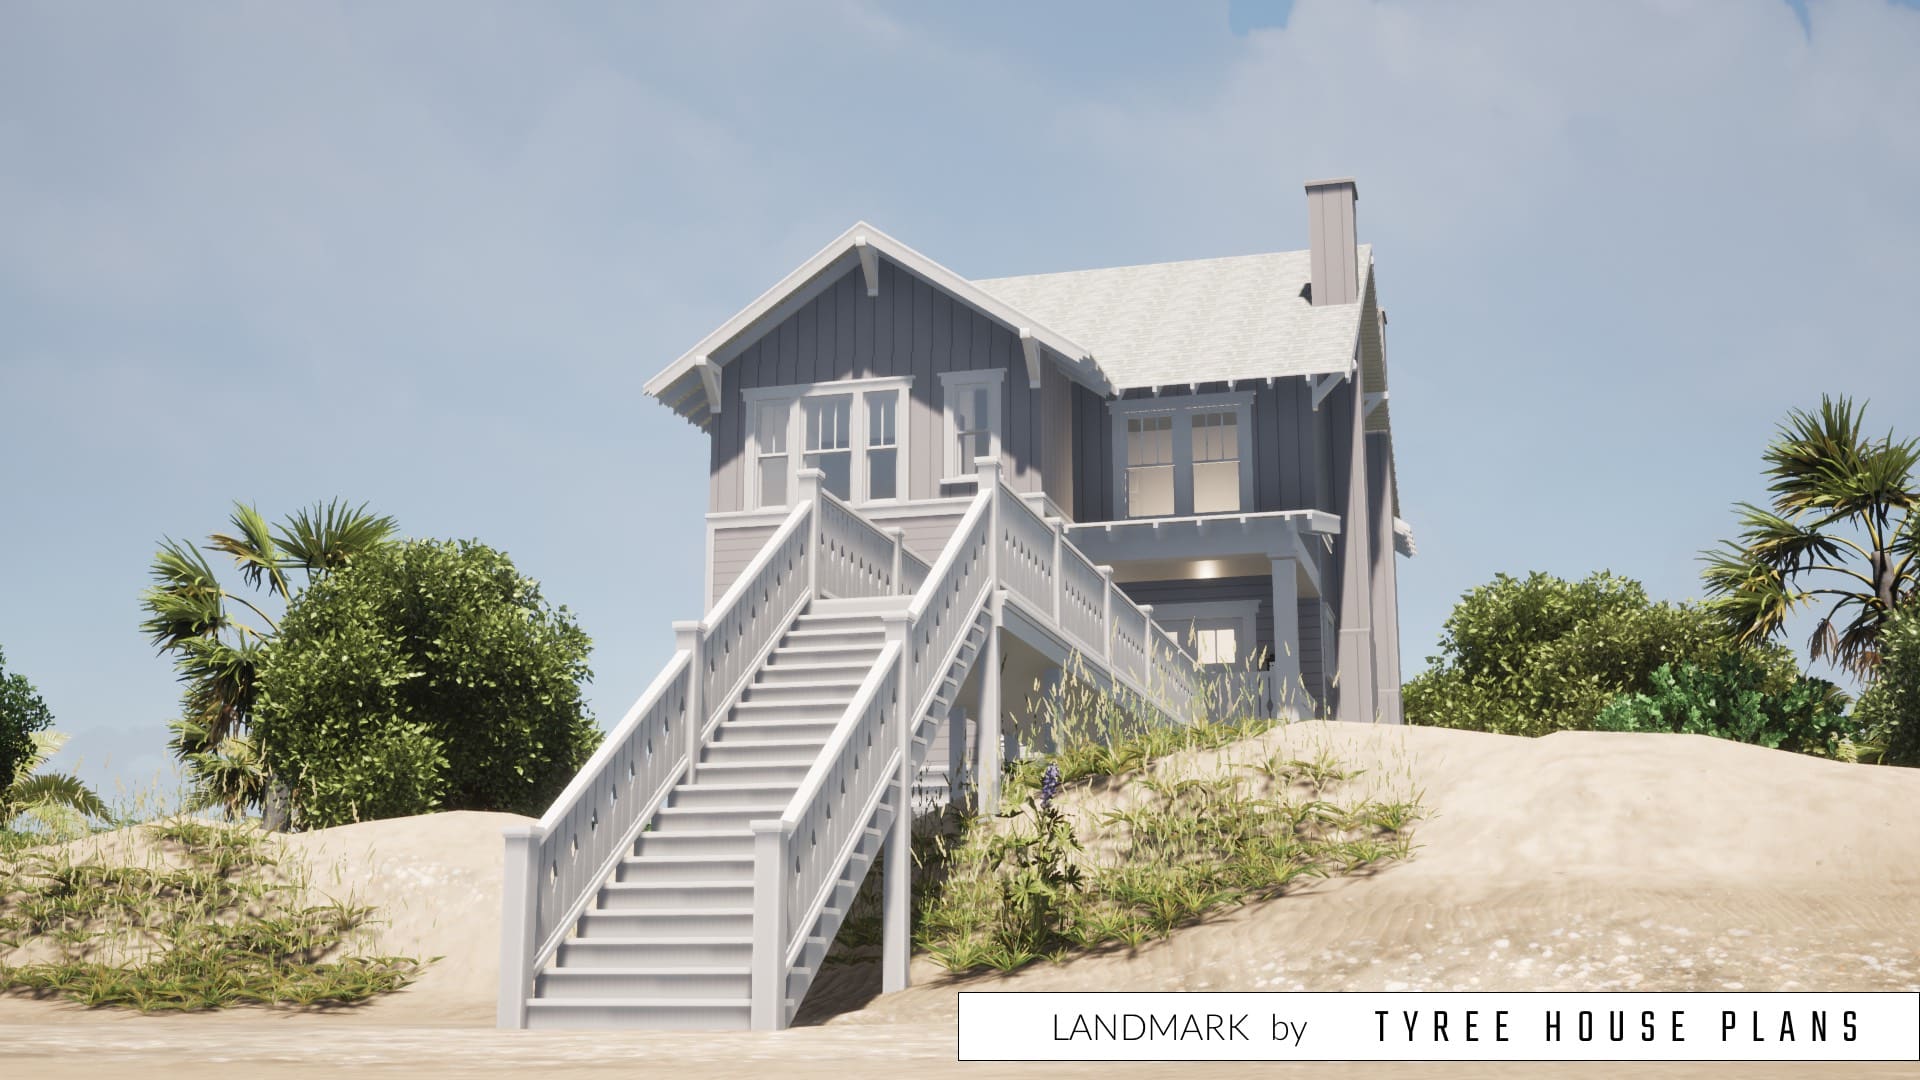 View of the house and elevated walkway from the beach. Landmark by Tyree House Plans.